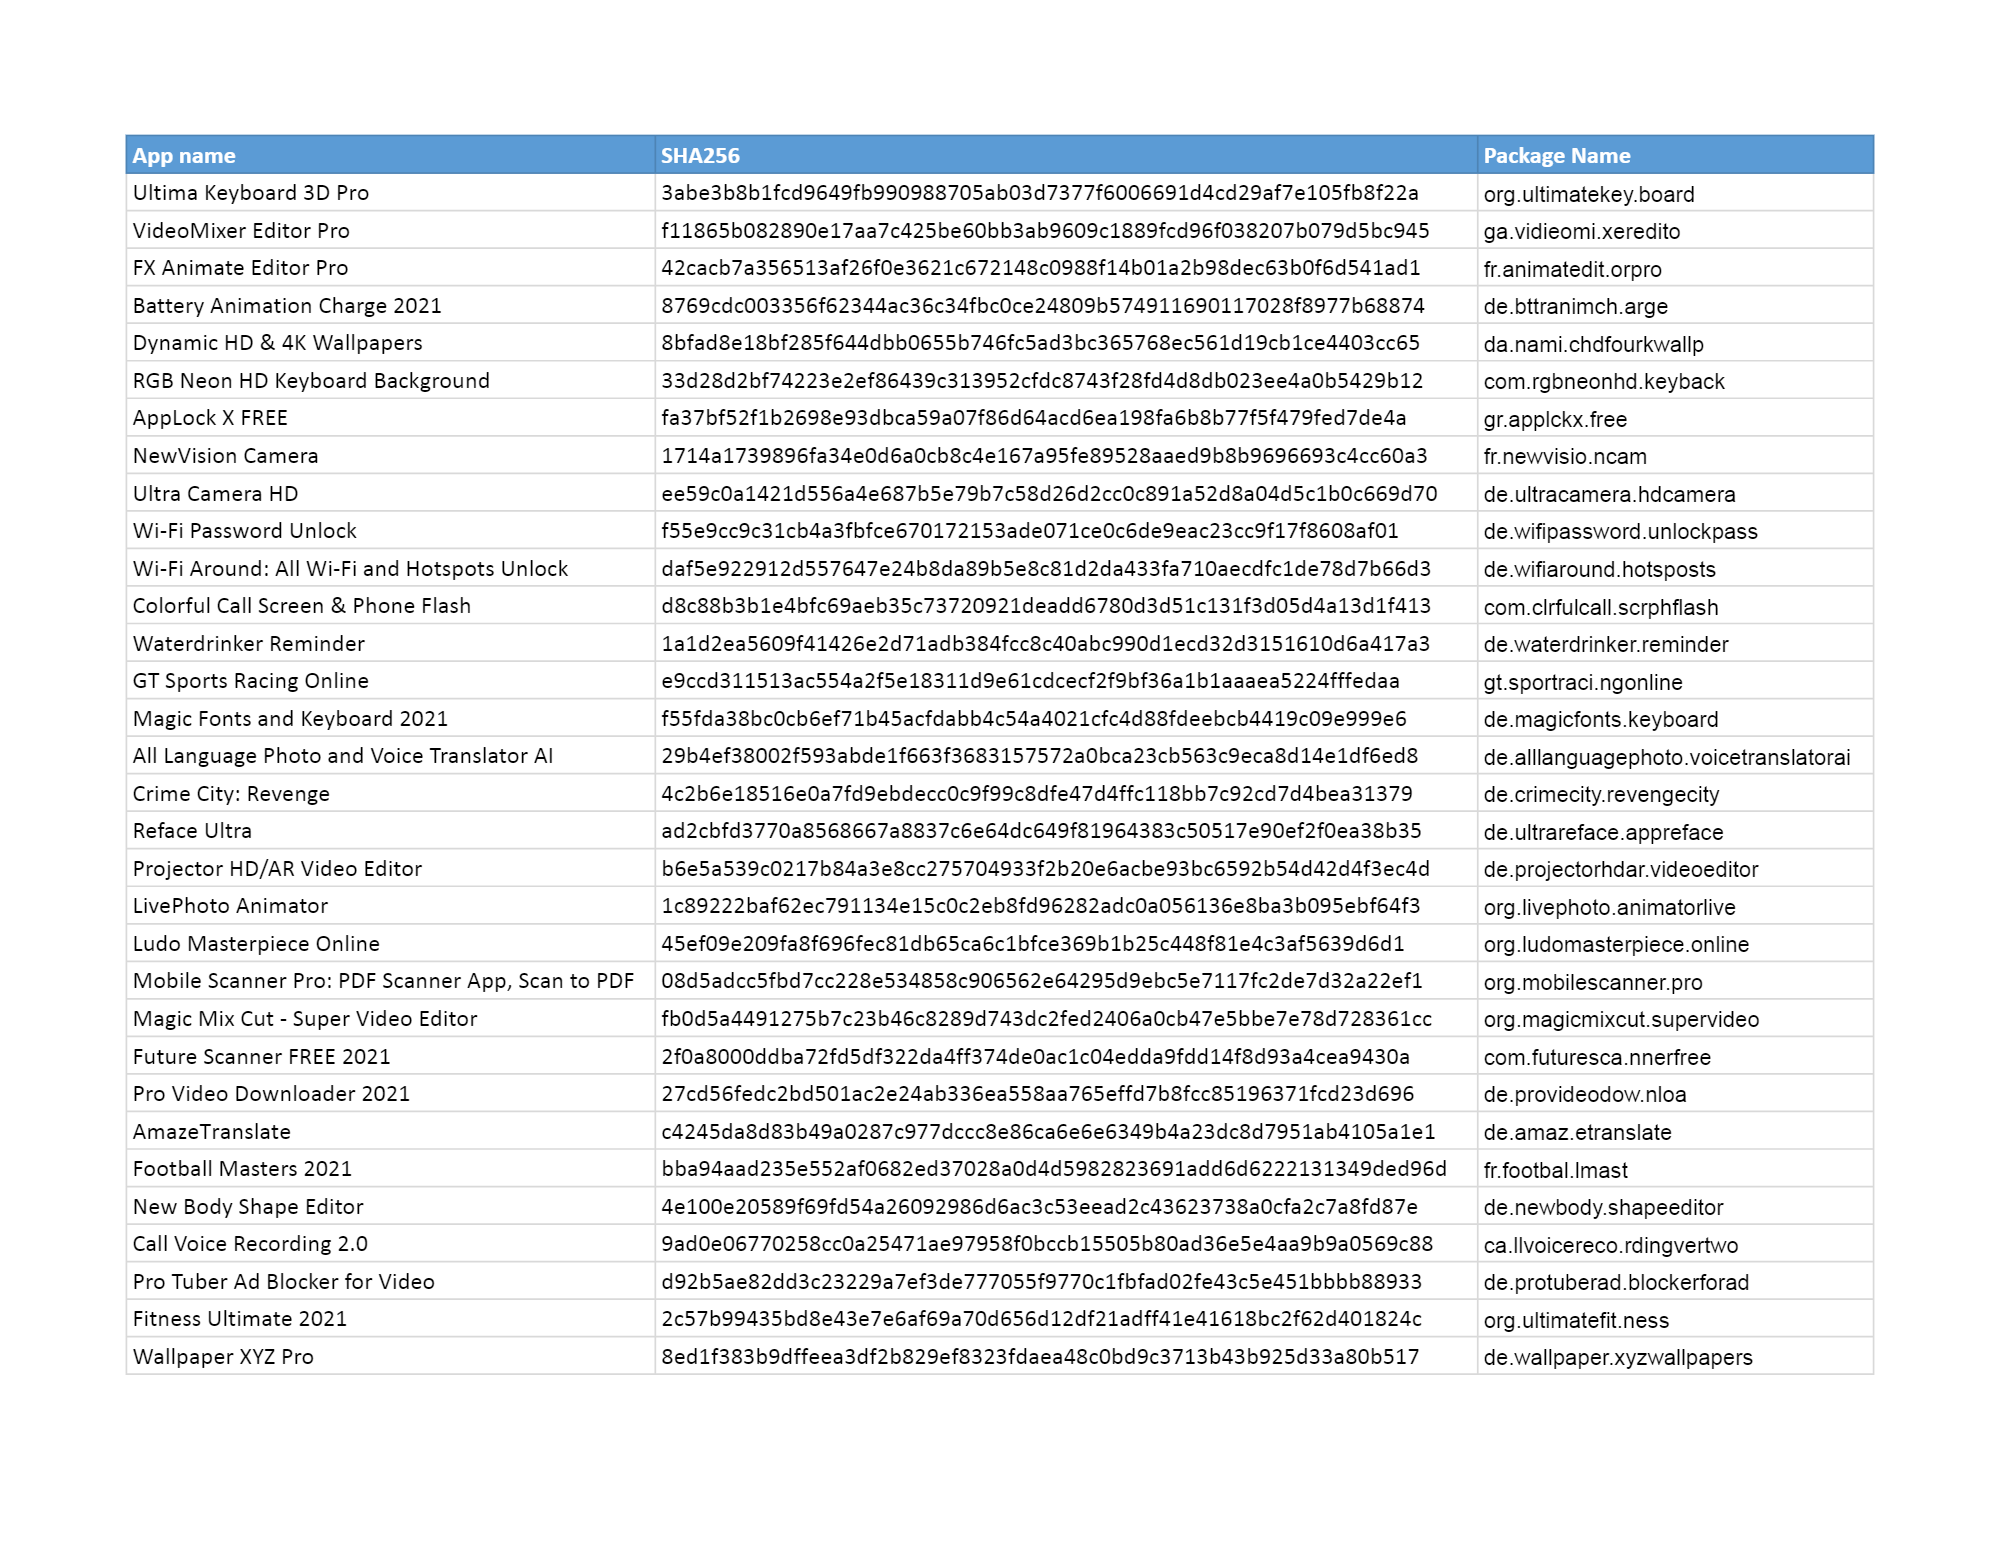 A list of apps identified with the UltimaSMS scam.